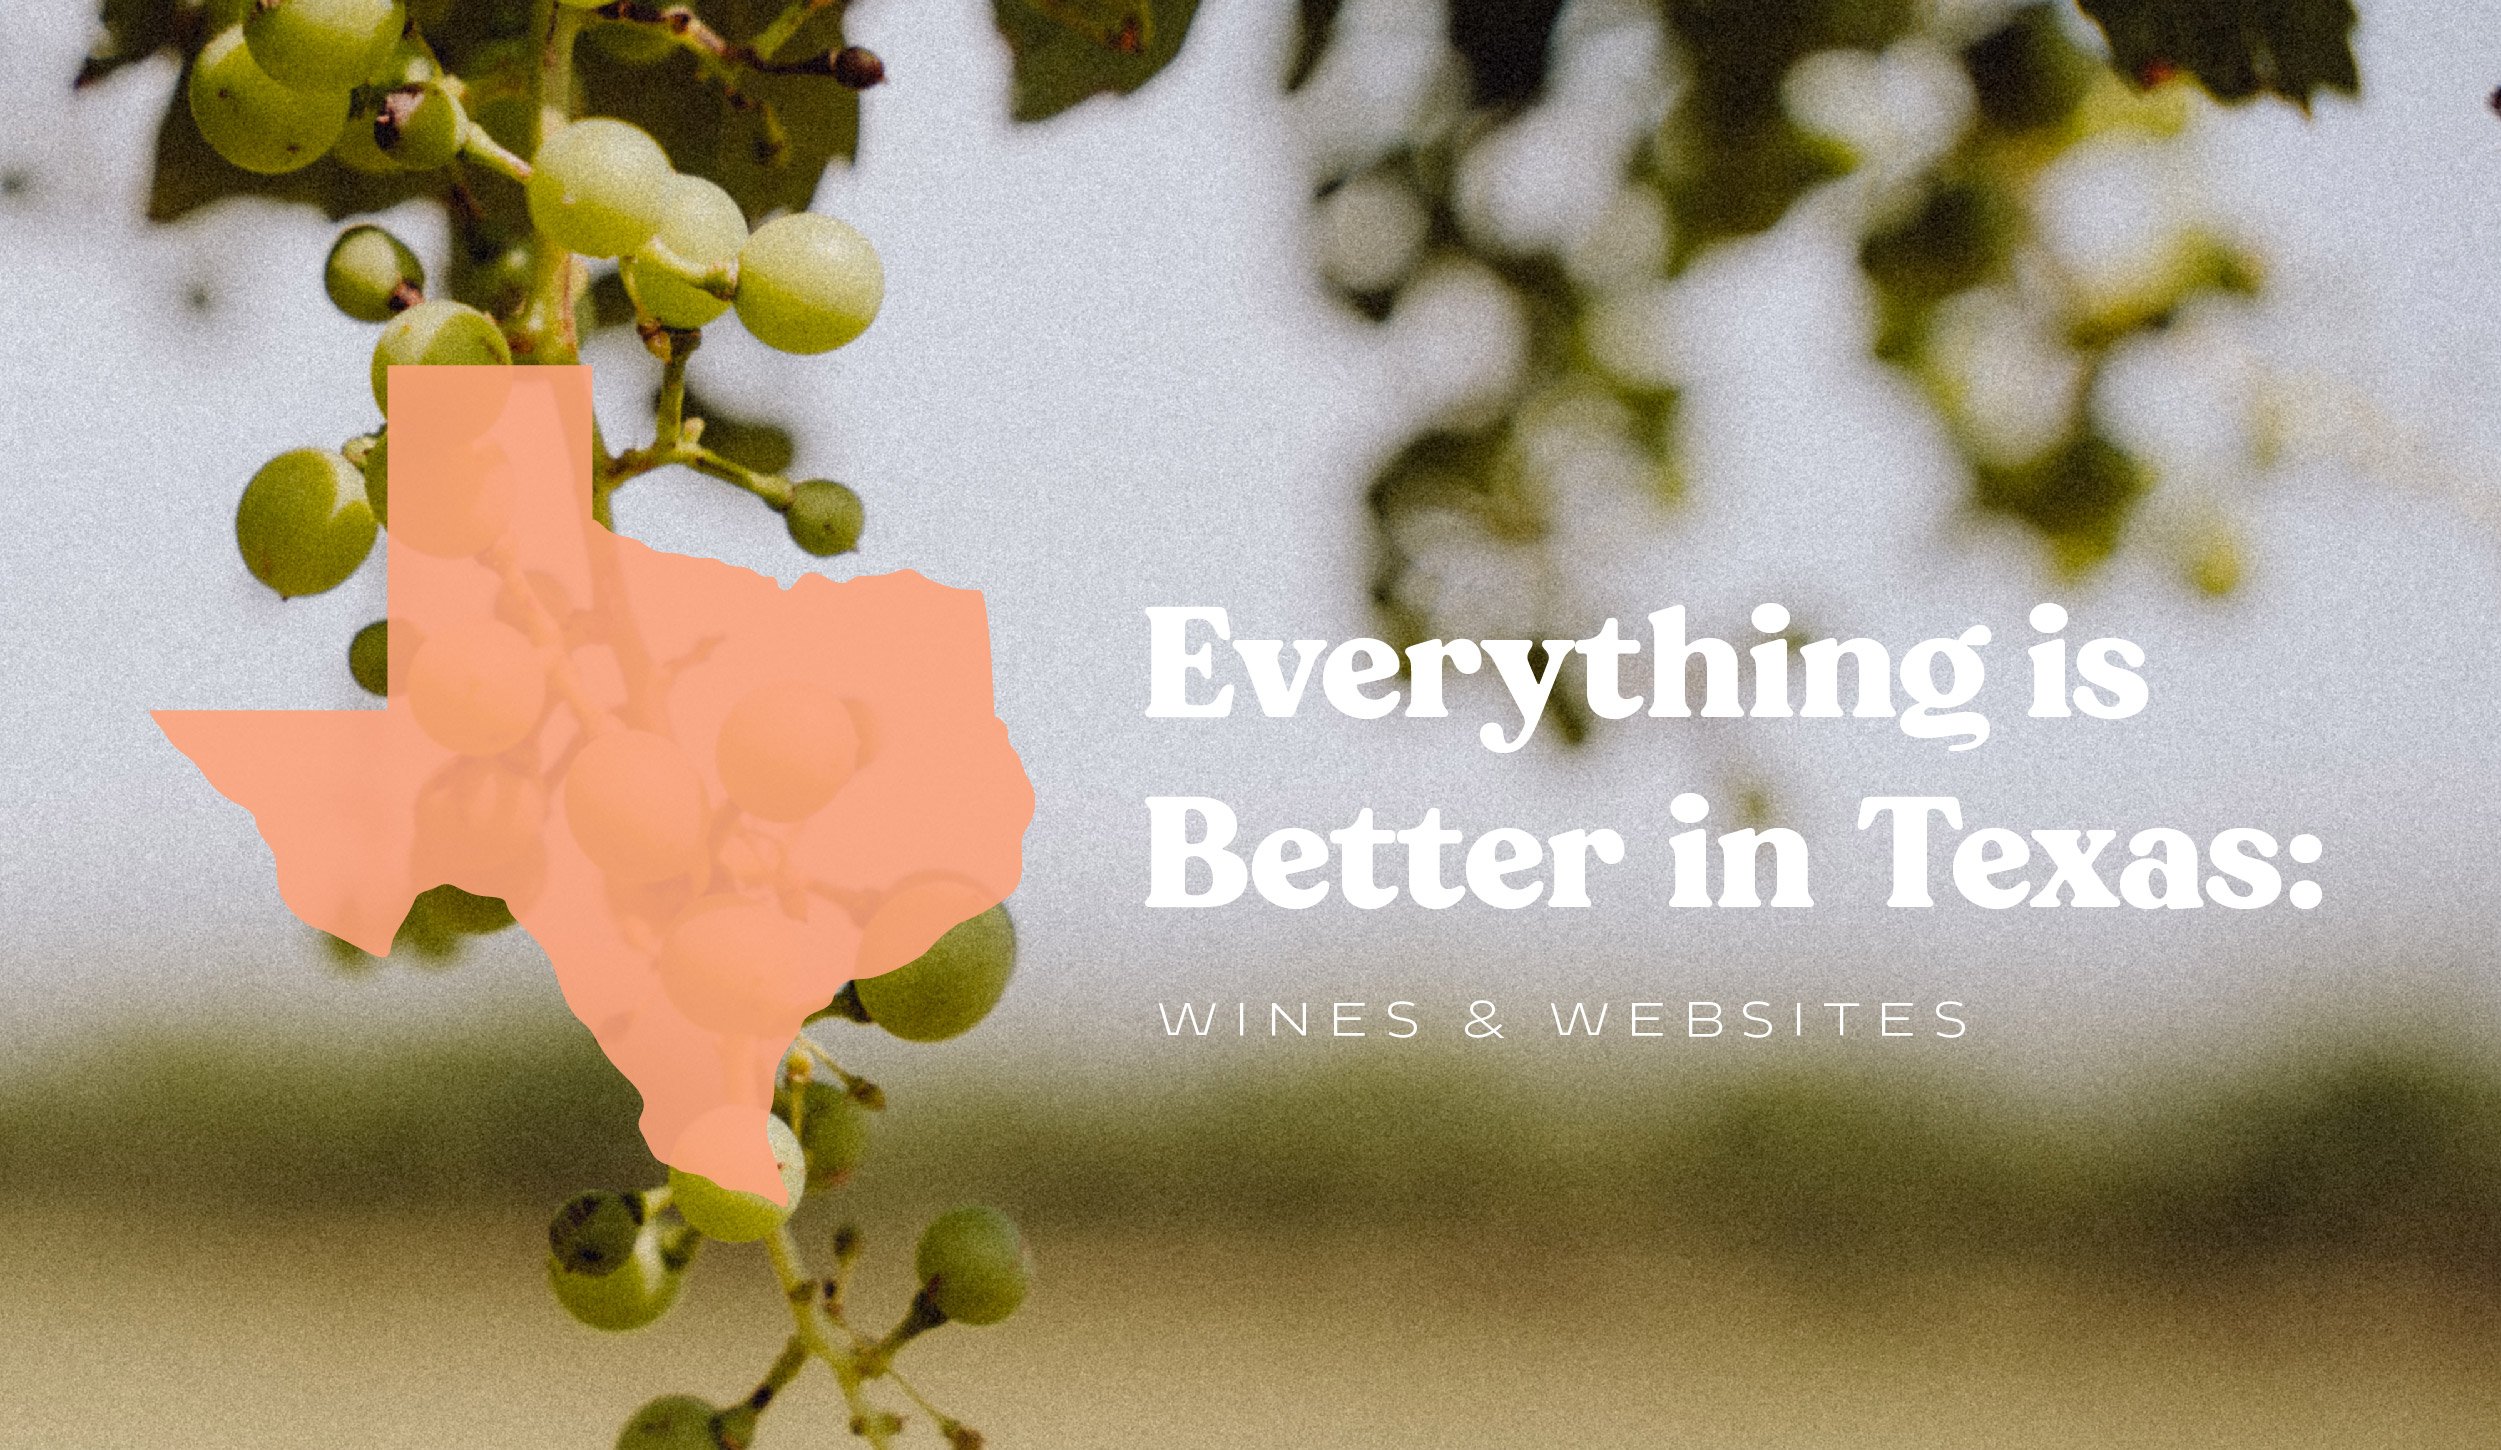 everything is better in texas: wine & websites